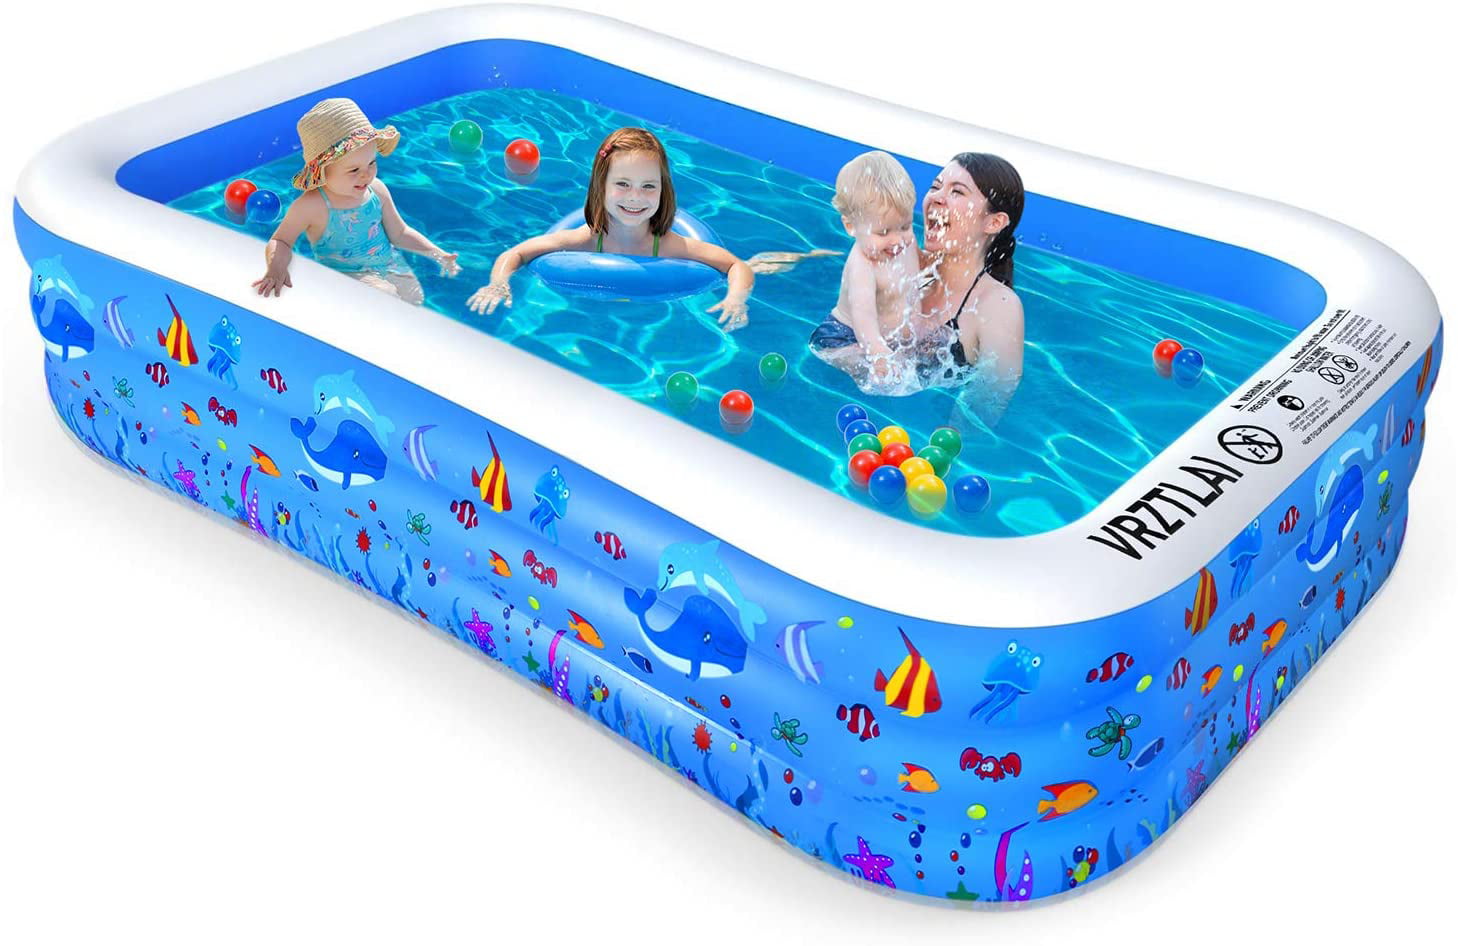 50x33x18inch Swimming Pool Peoples PVC Thickened Abrasion Resistant Inflatable Pool Family Interaction Summer Water Party Swimming Pool for Kids Adults Swimming Pools for Garden Backyard Outdoor 